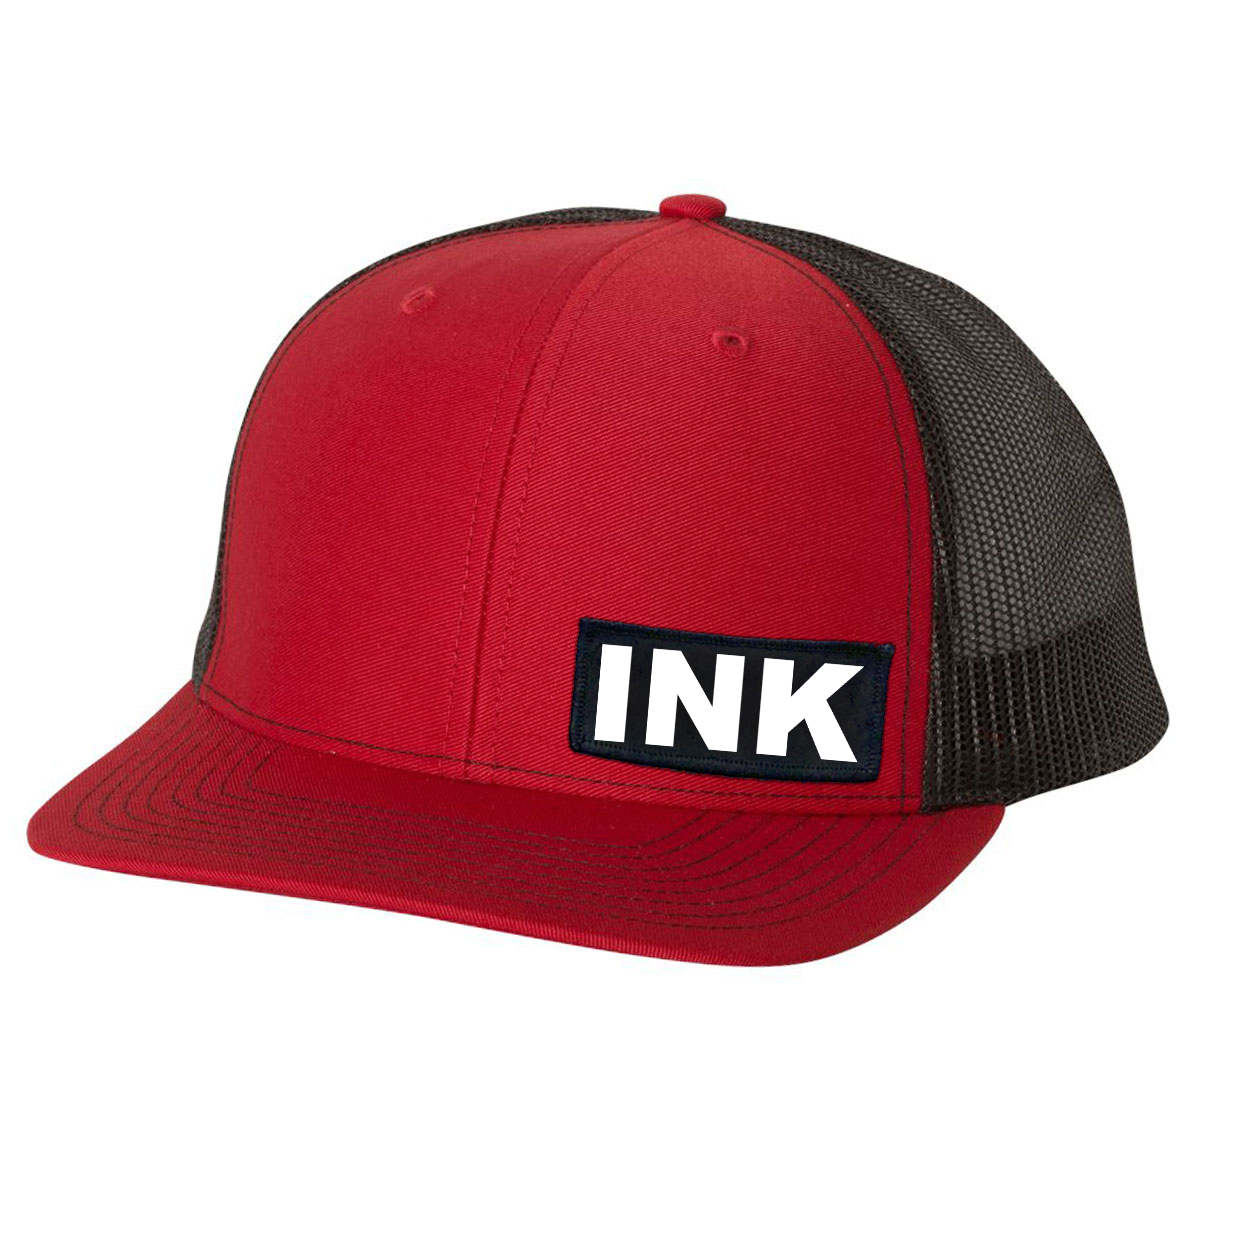 Ink Brand Logo Night Out Woven Patch Snapback Trucker Hat Red/Black